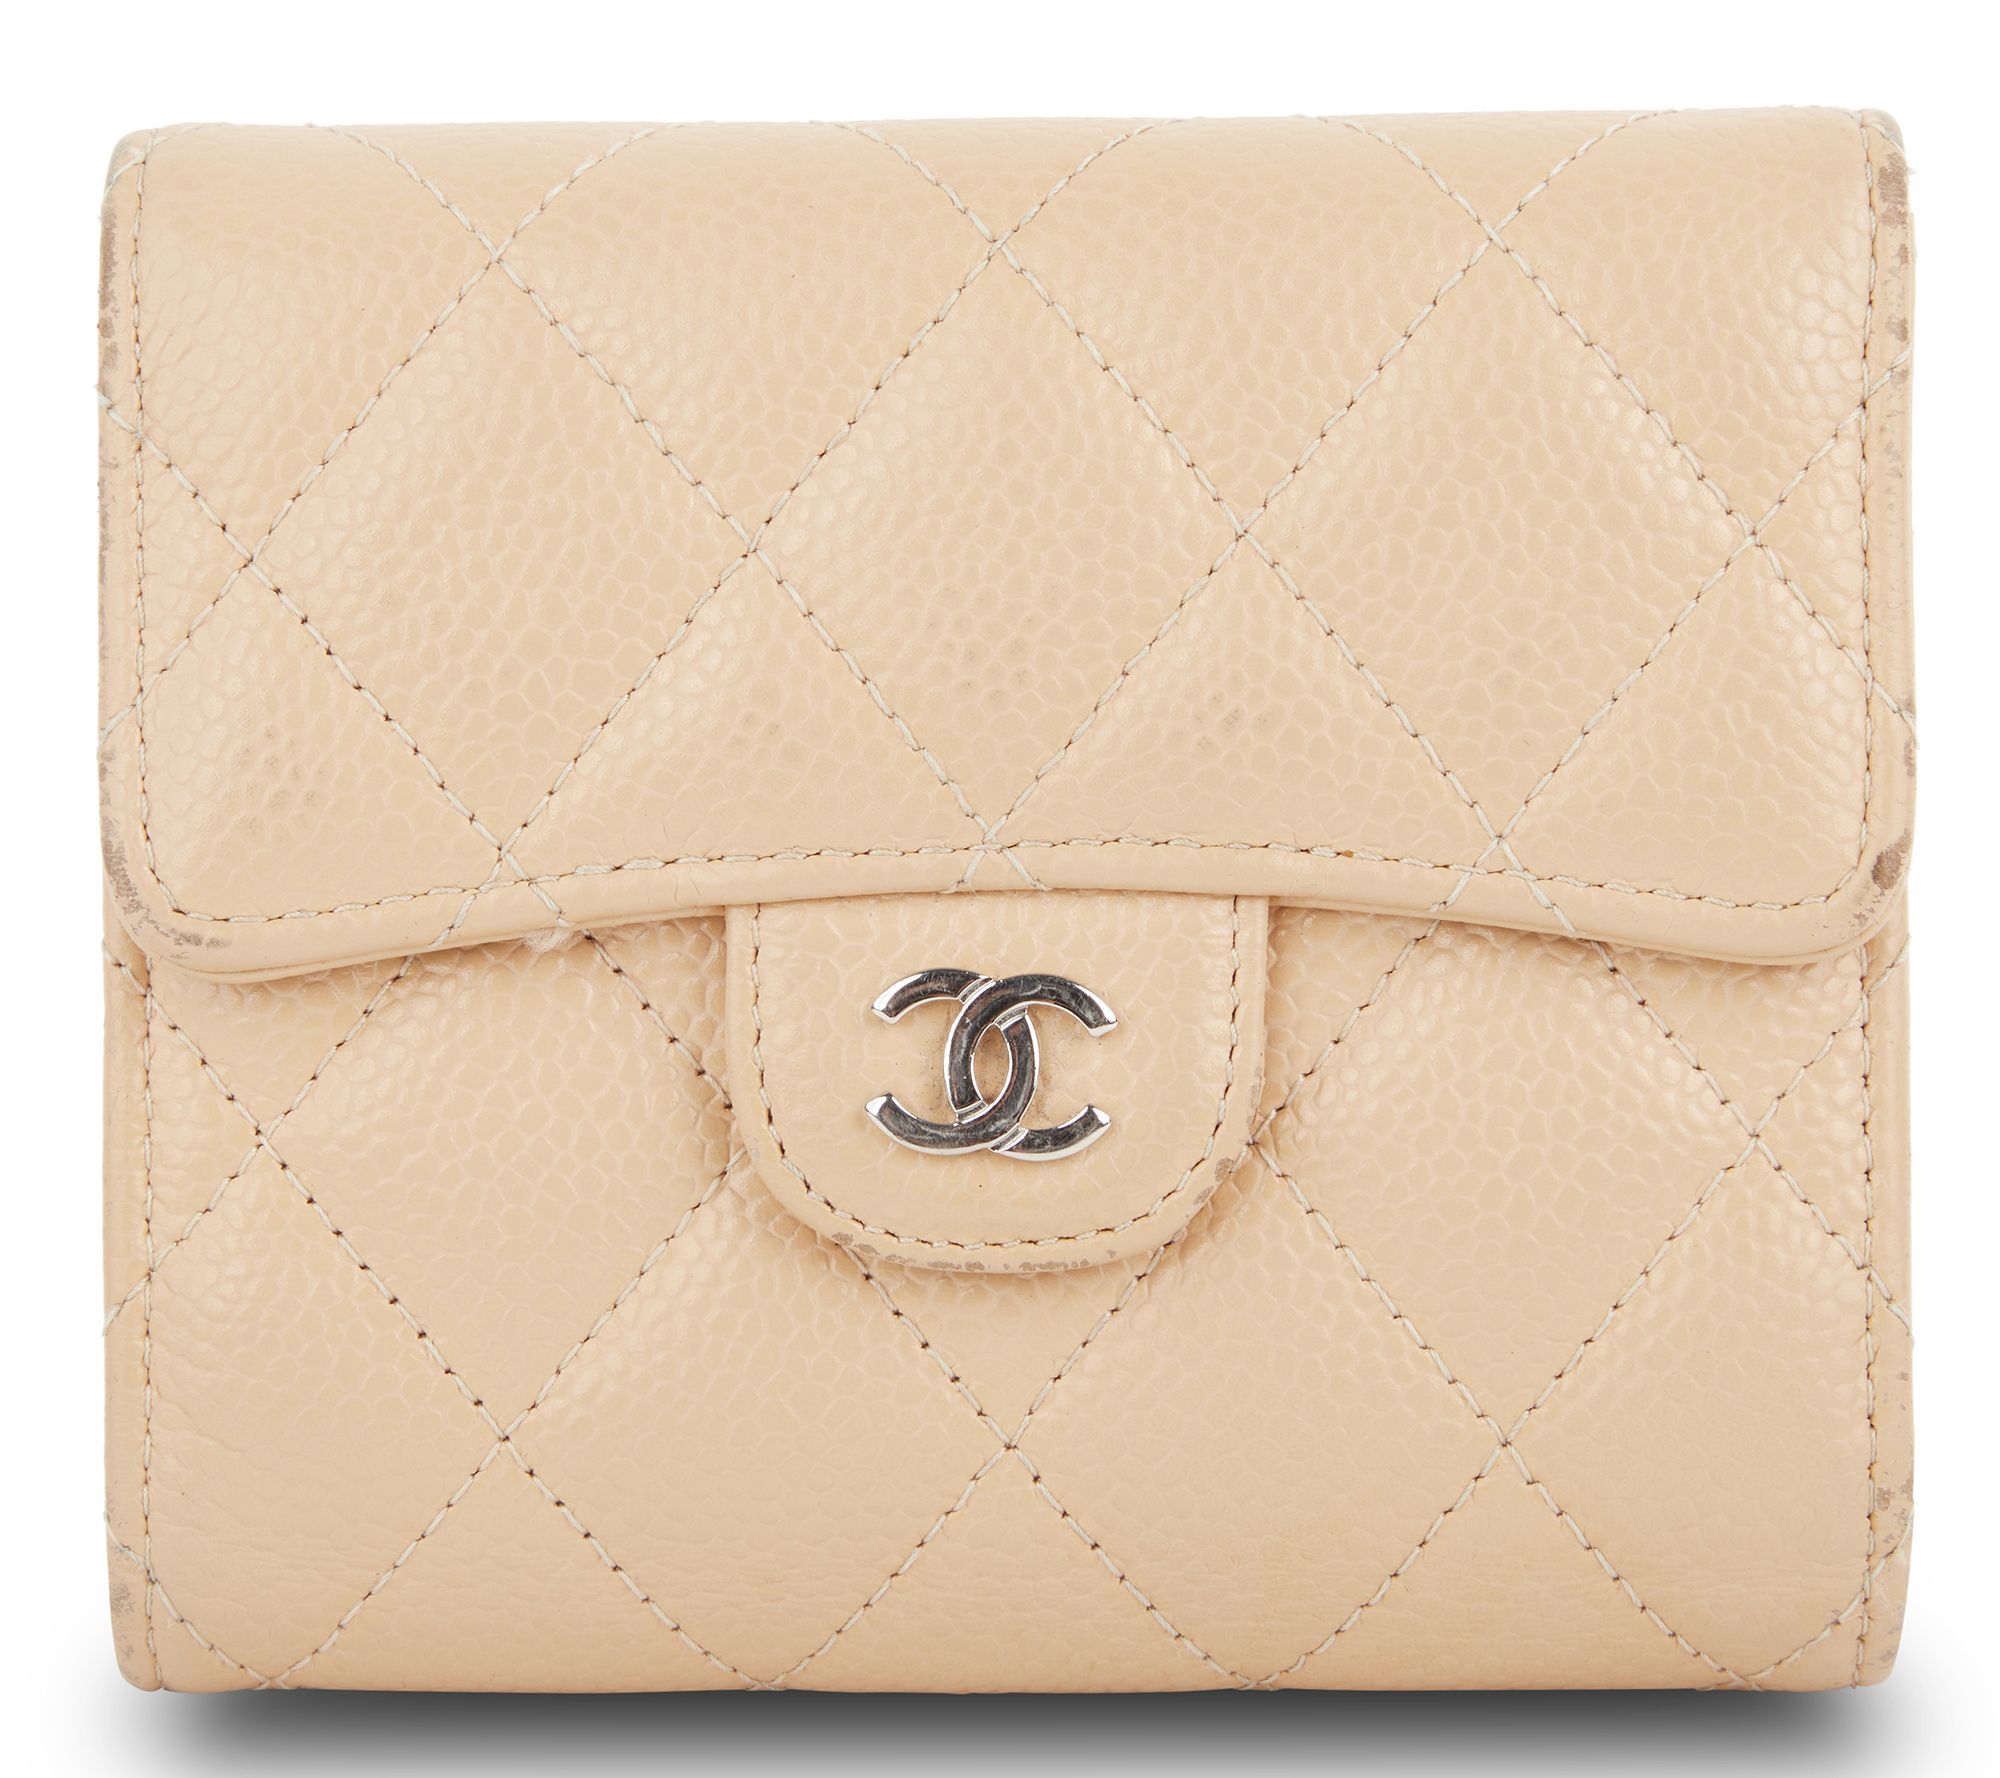 Chanel Compact Wallet - 20 For Sale on 1stDibs